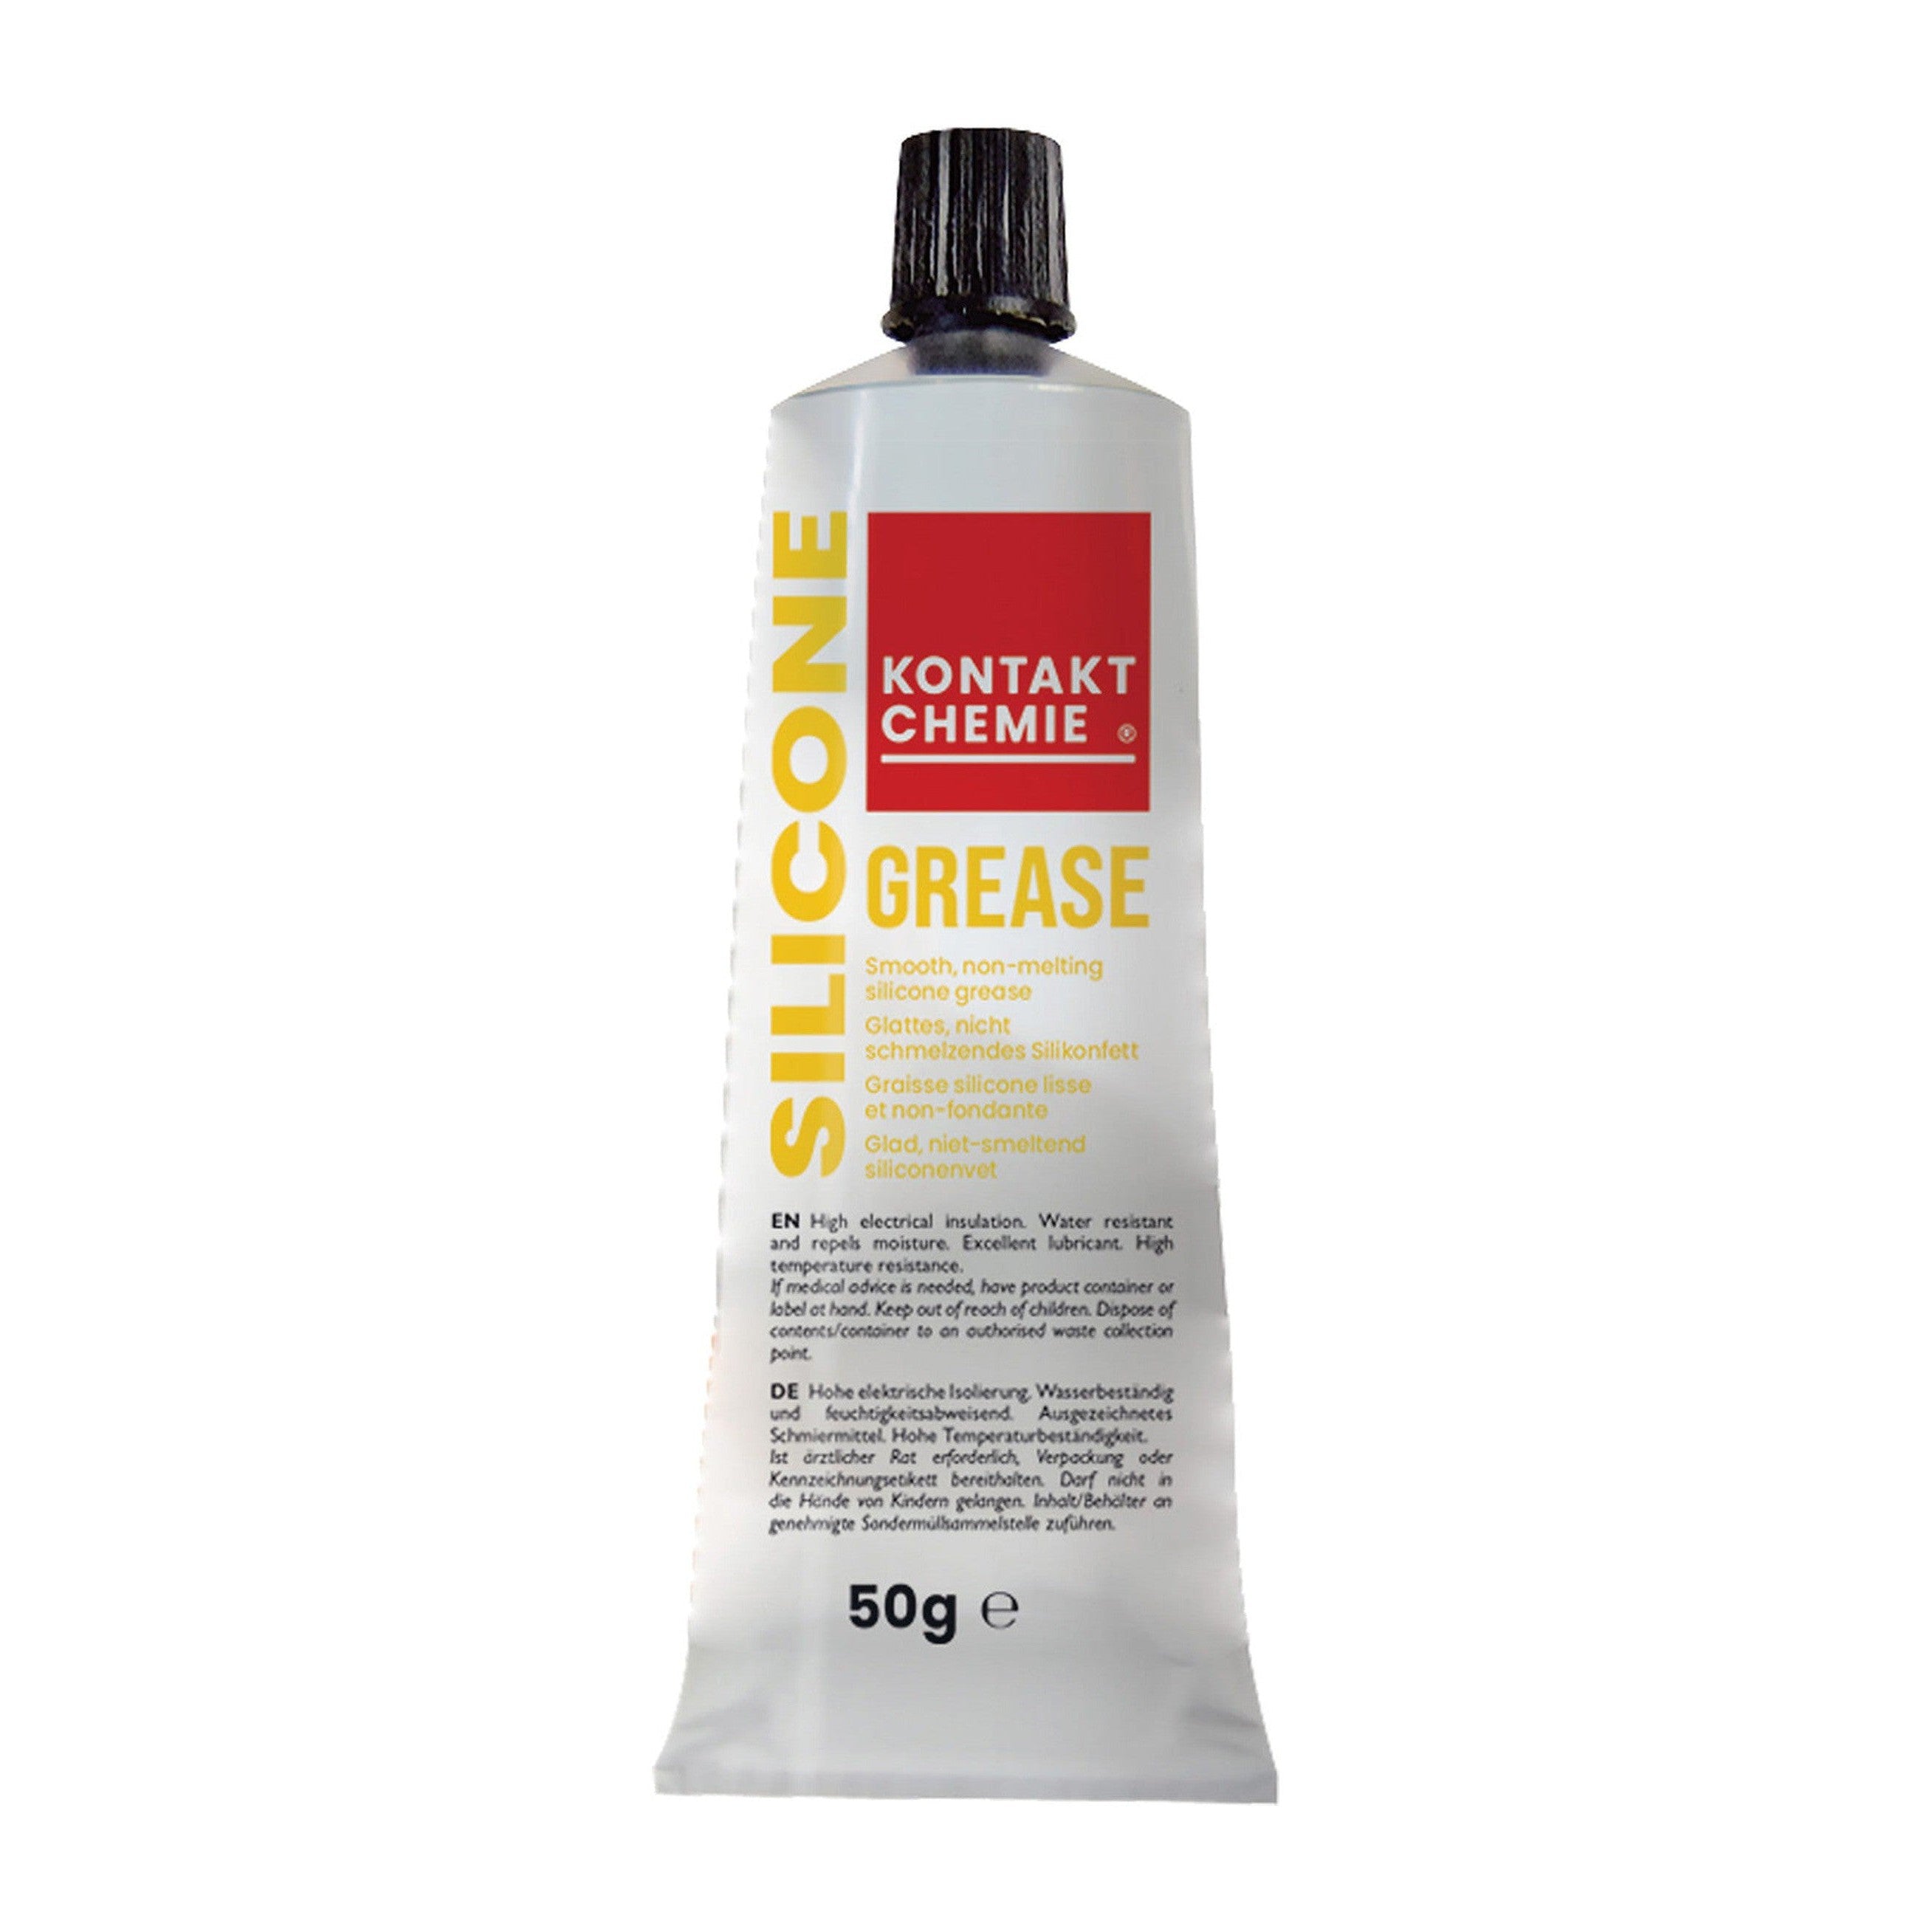 Silicone Grease 50g